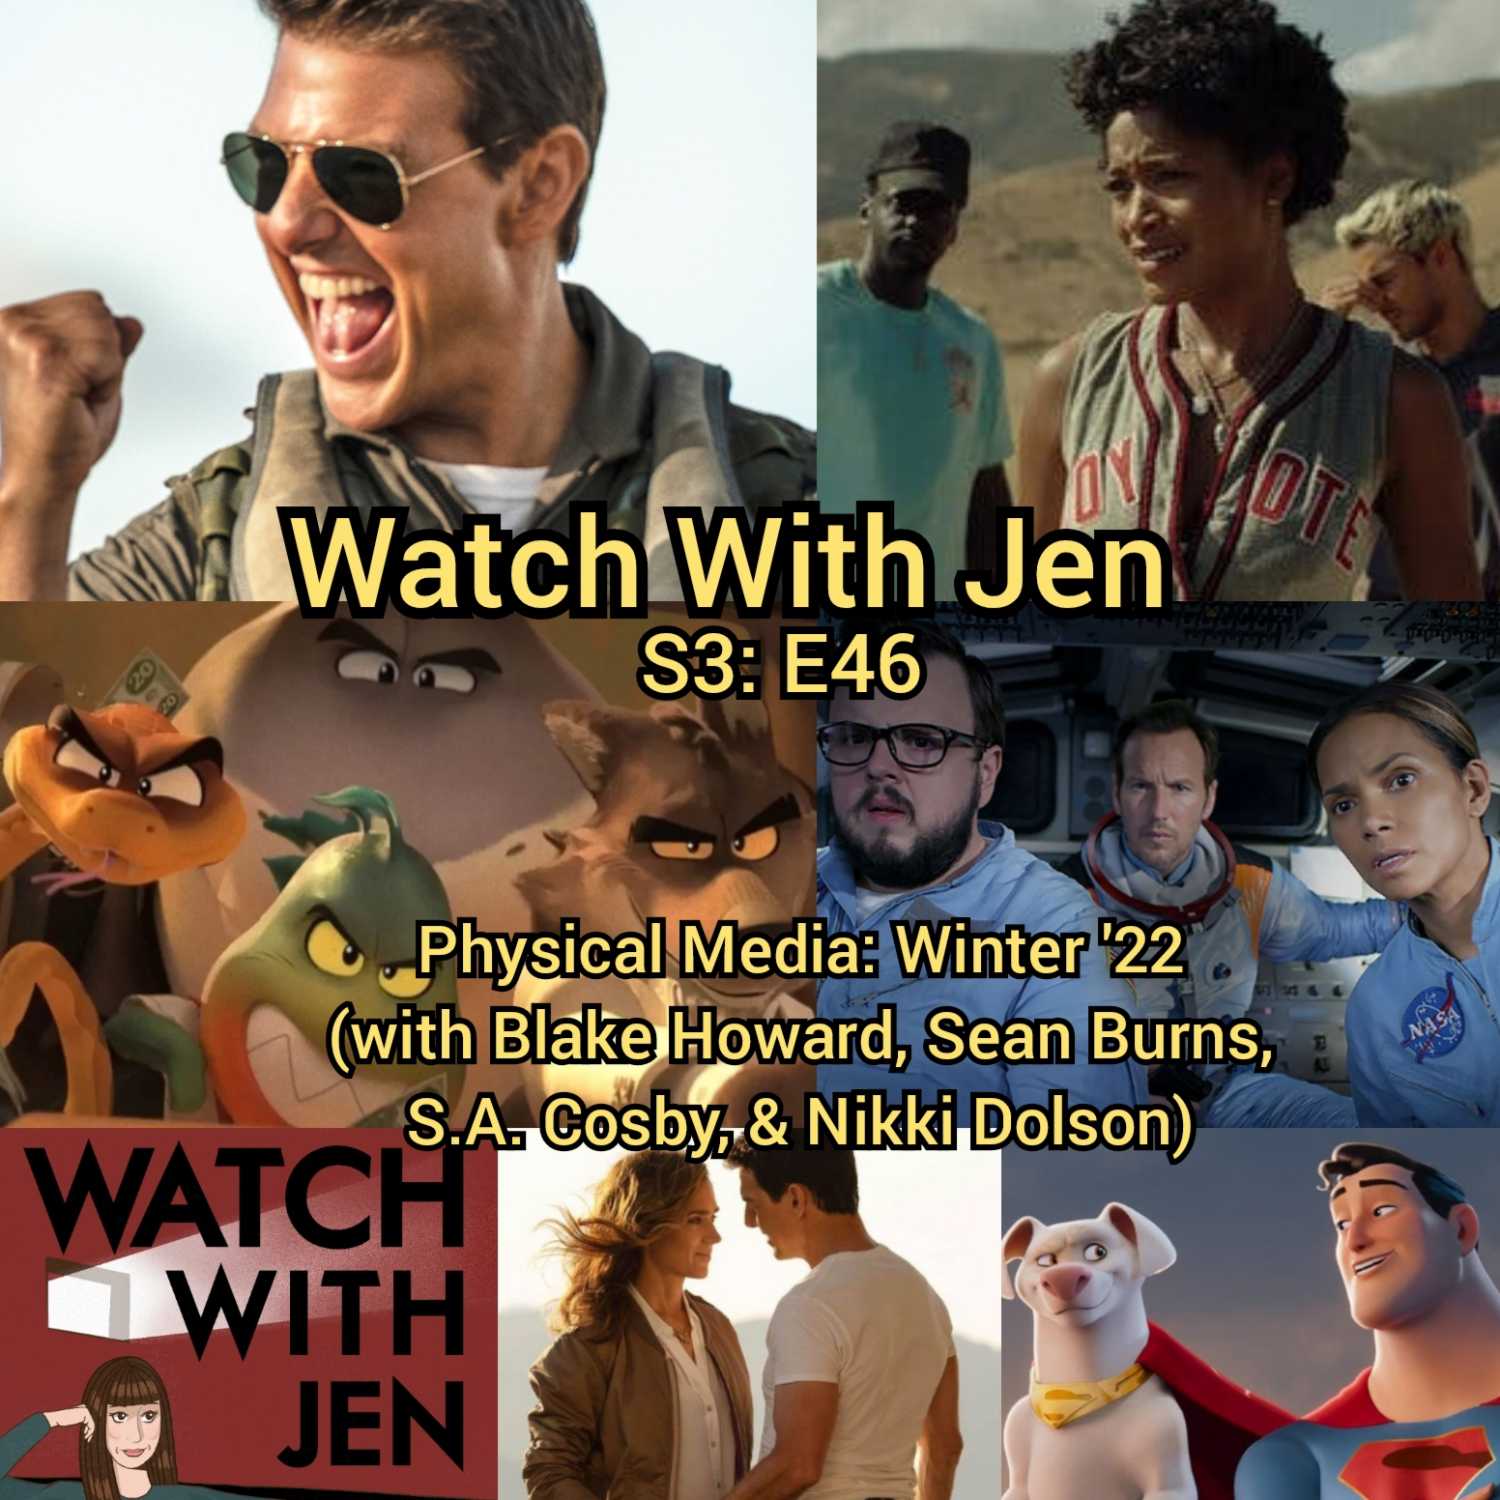 Watch With Jen - S3: E46 - Physical Media: Winter '22 (with Blake Howard, Sean Burns, S.A. Cosby, & Nikki Dolson)